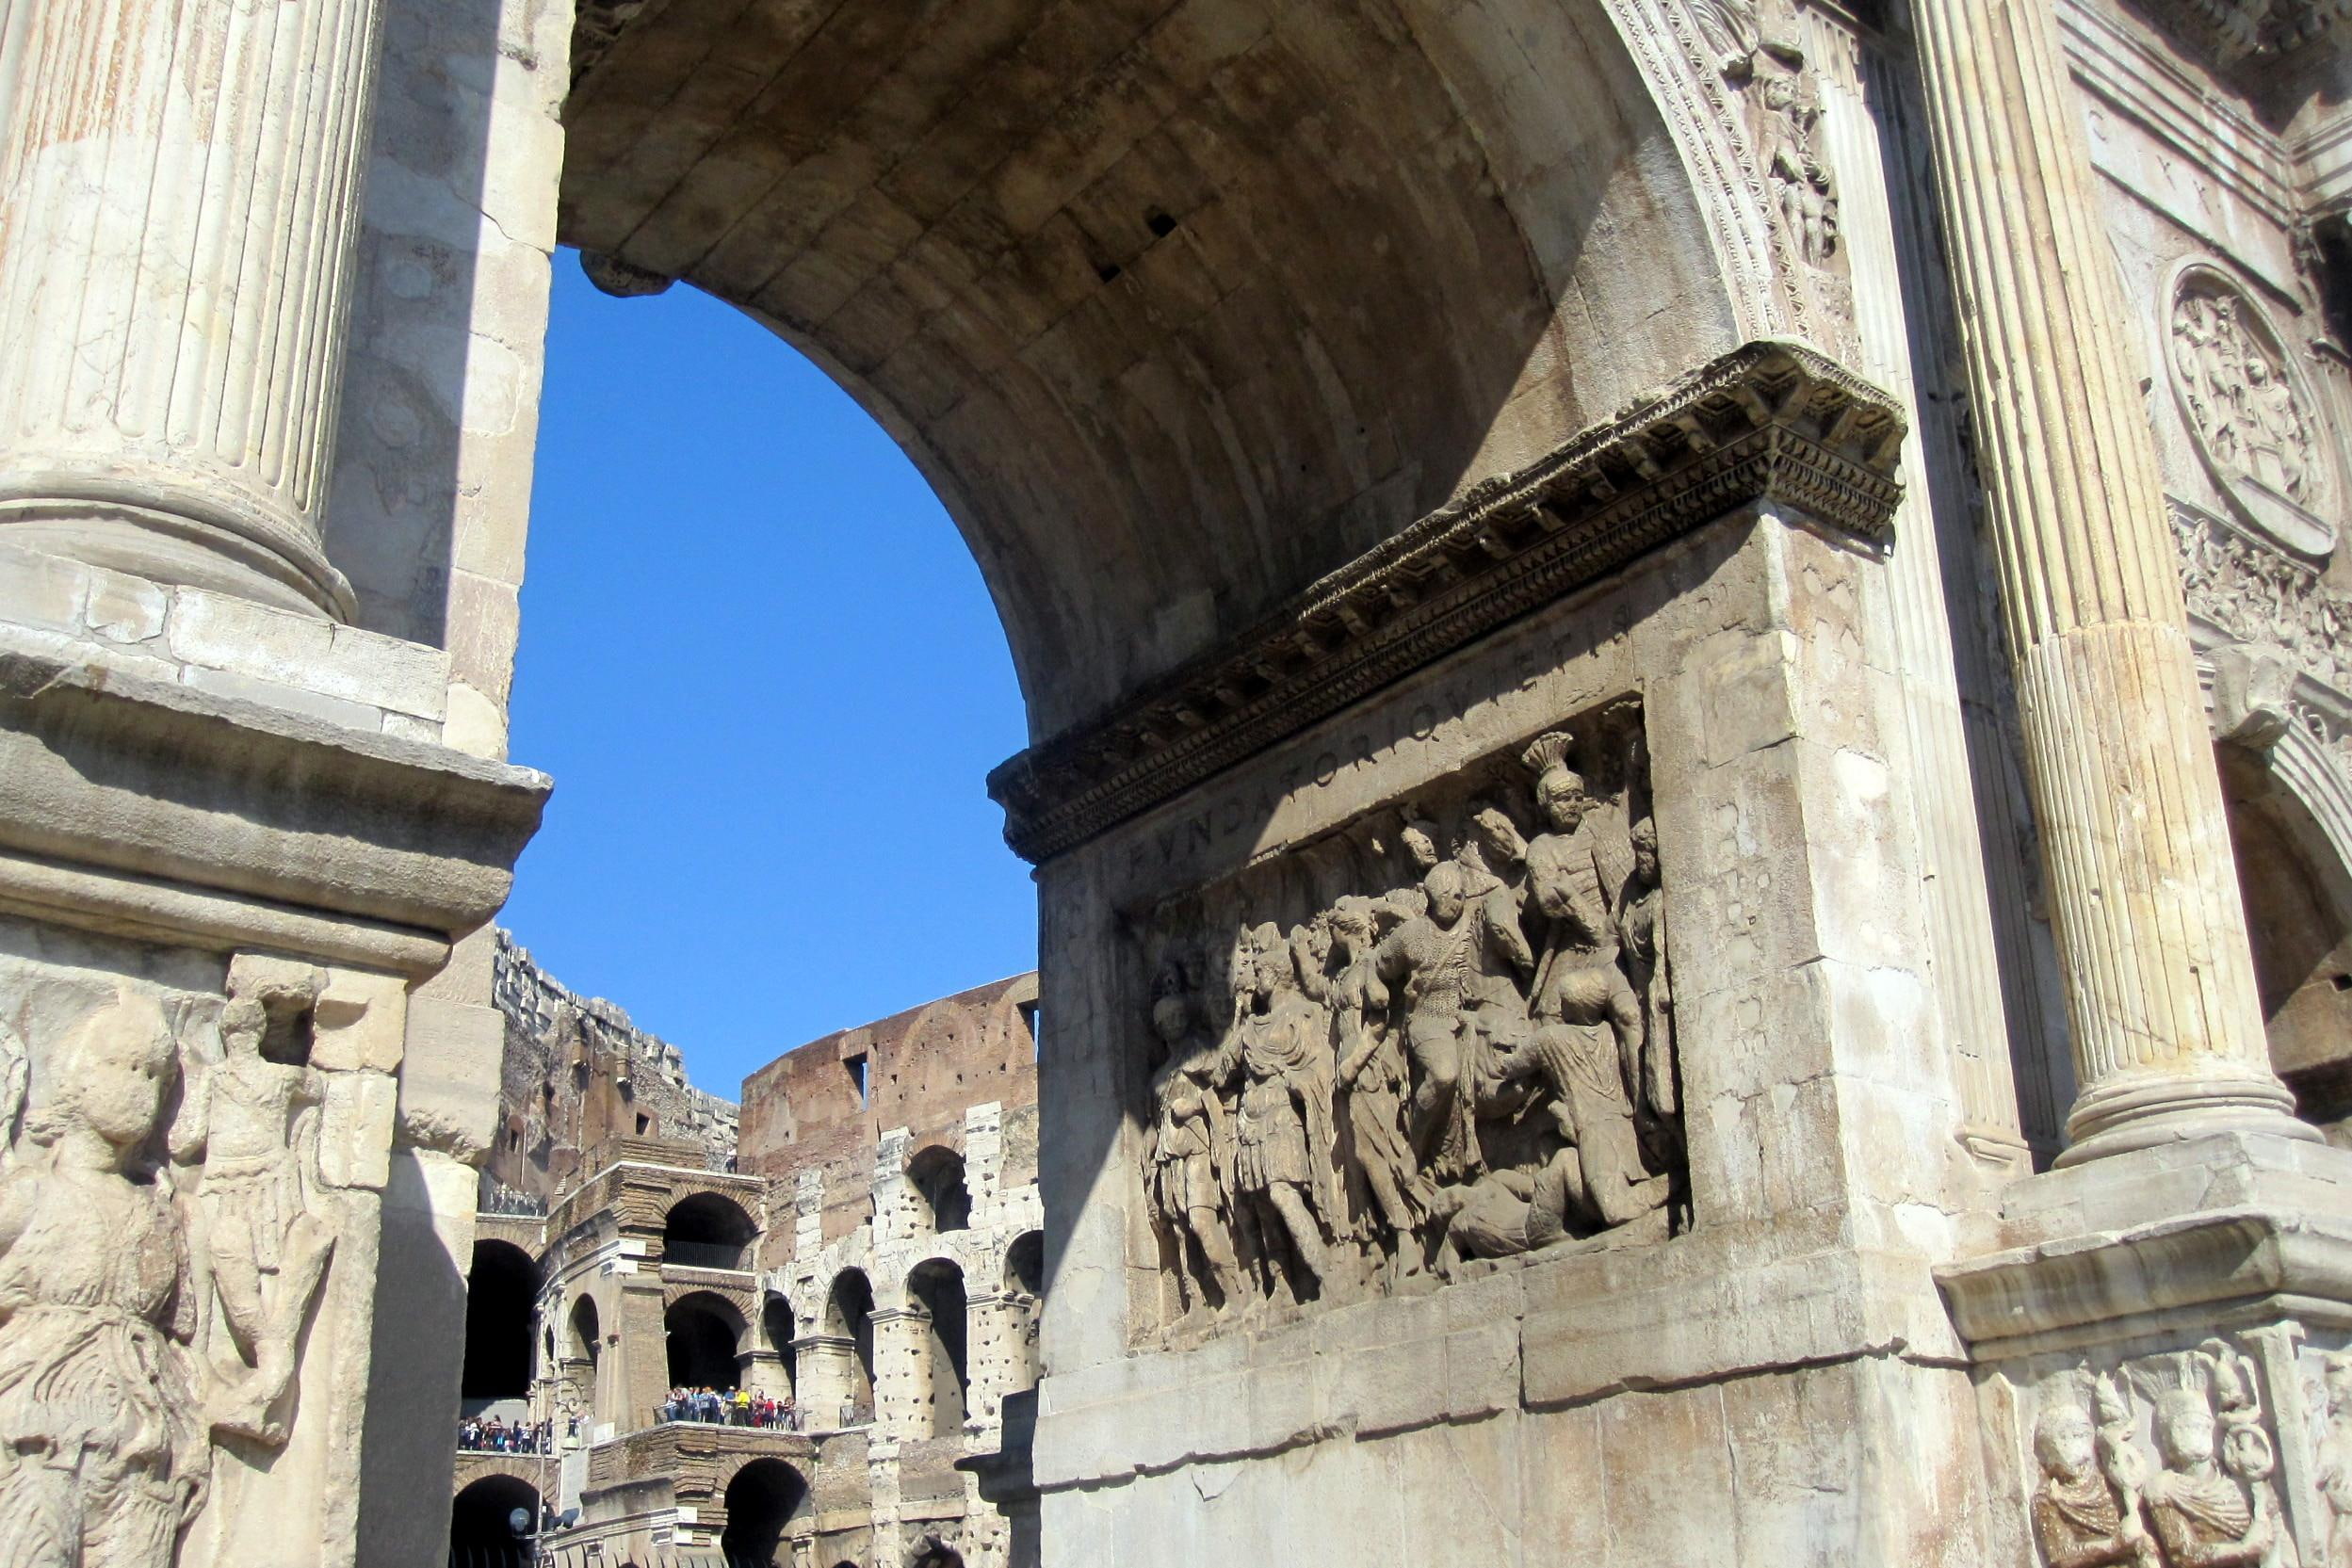 The Arch Of Constantine, architecture, monuments, history, ancient